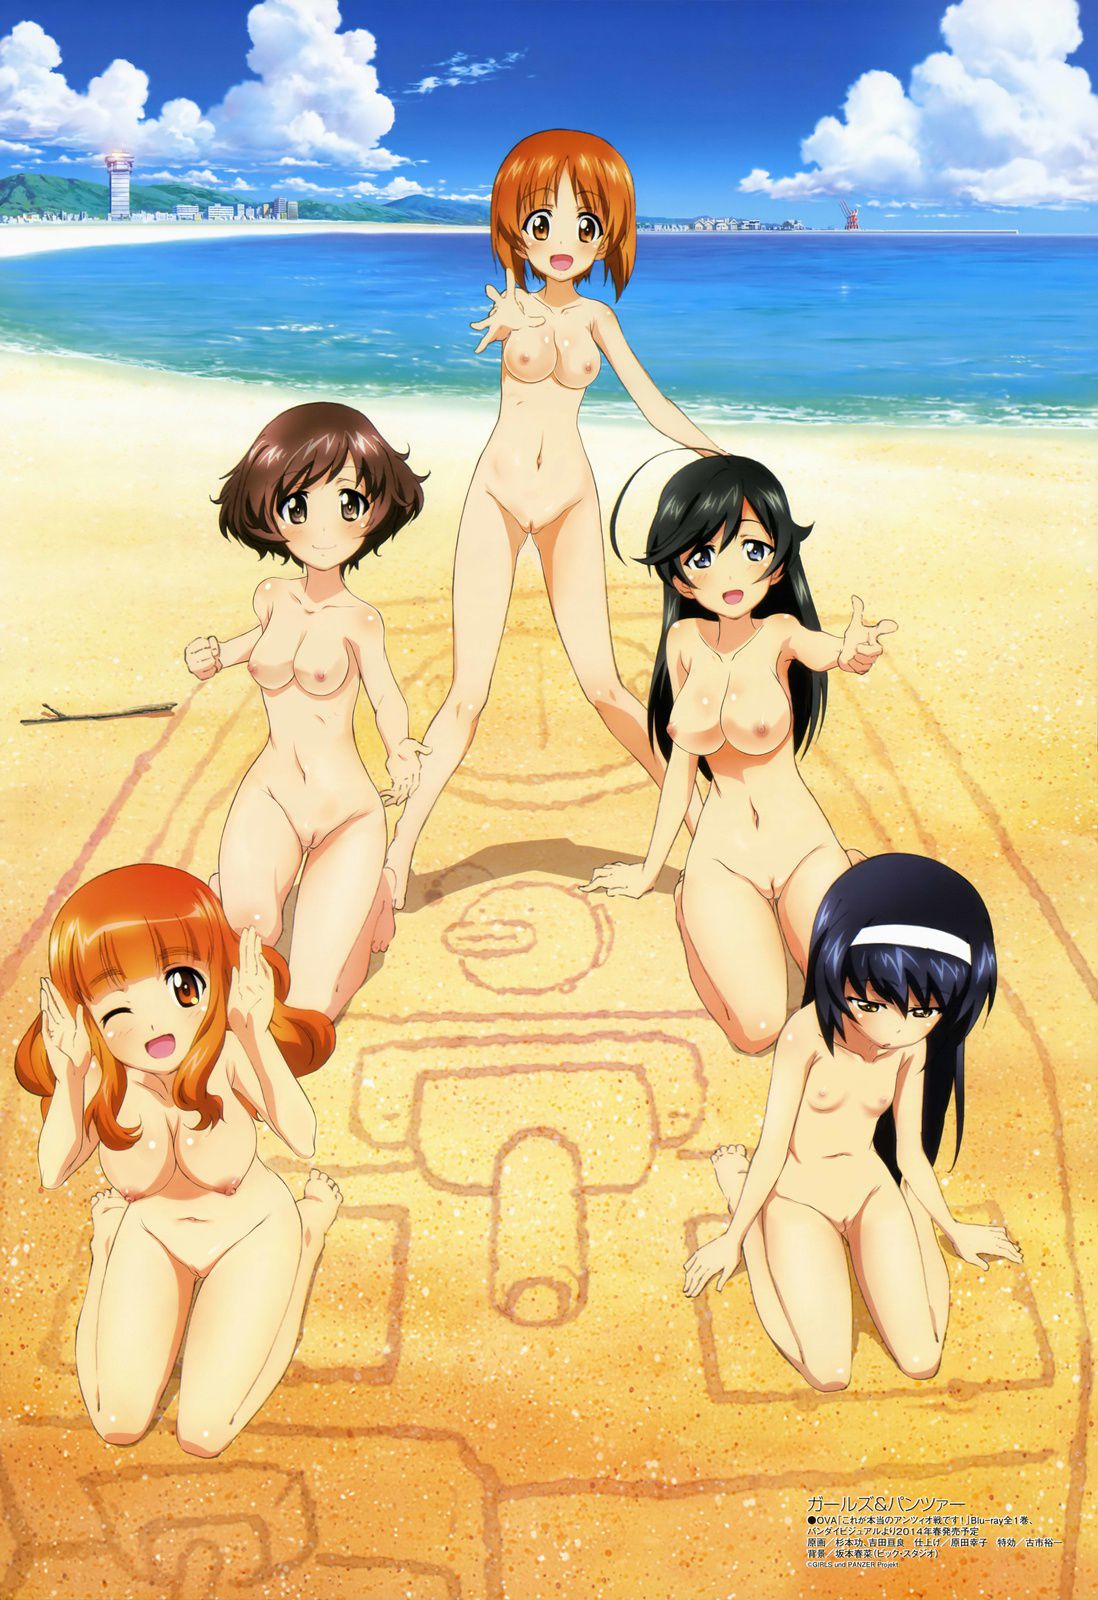 Stripping of official illustrations of Girls und Panzer (with original picture) 3